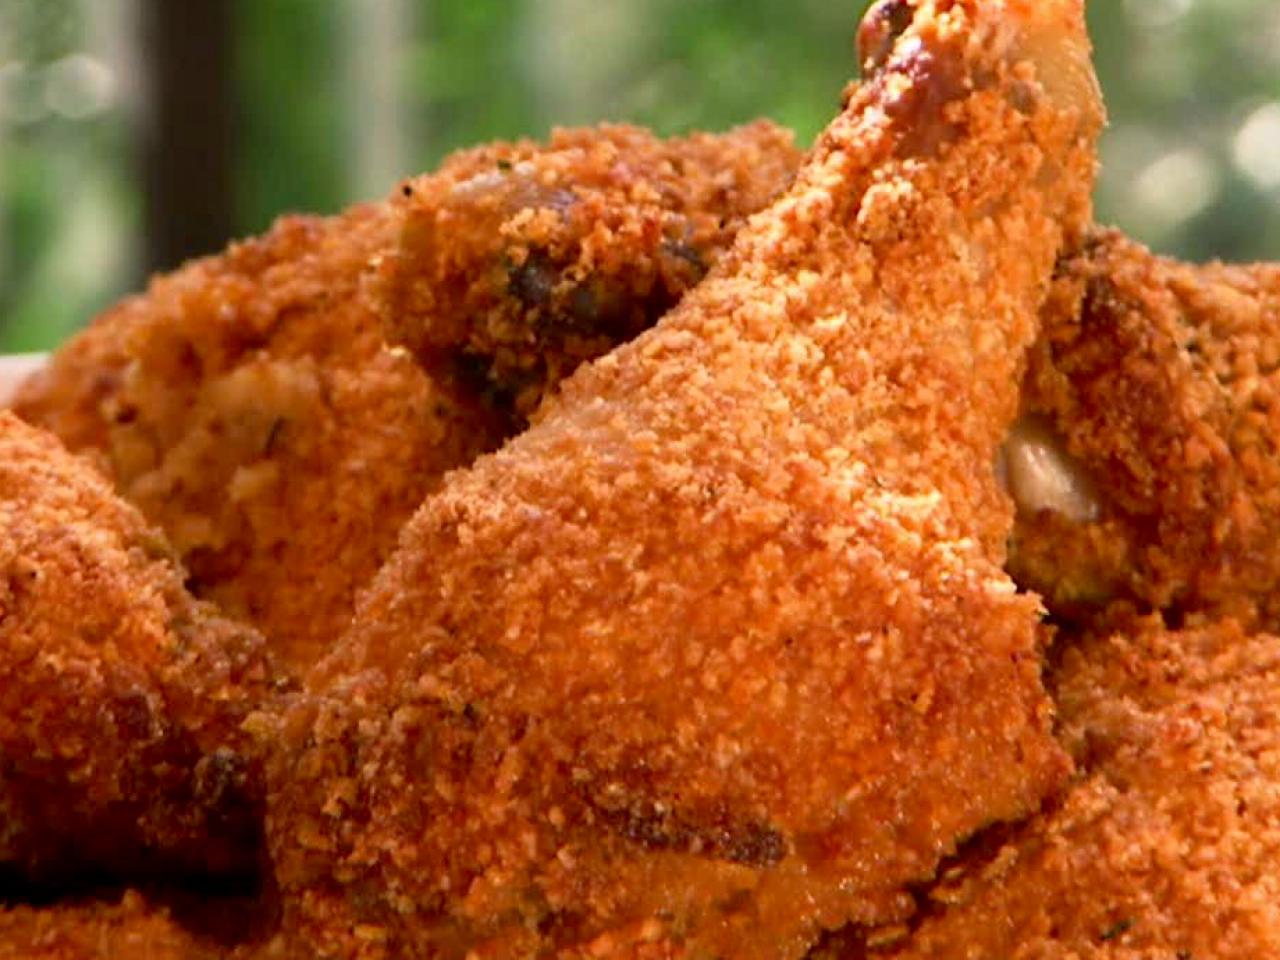 Buttermilk Baked Chicken Recipe The Neelys Food Network image pic picture